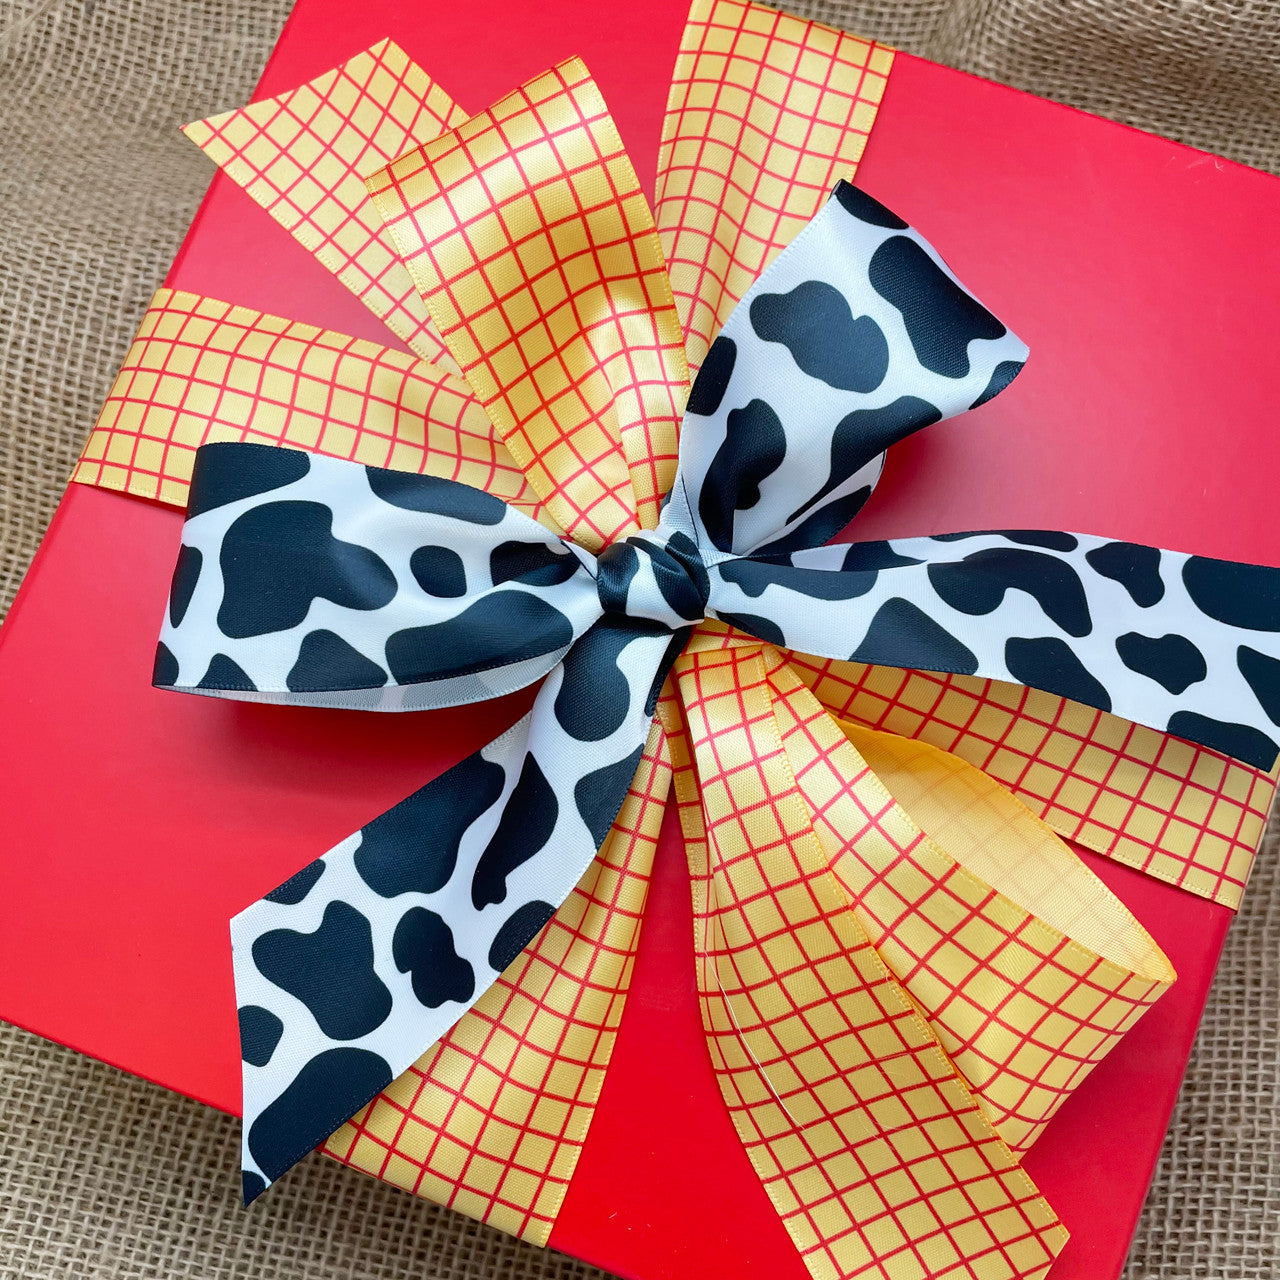 Combine our Toy Story plaid with our cow print for a fun Toy Story themed gift!